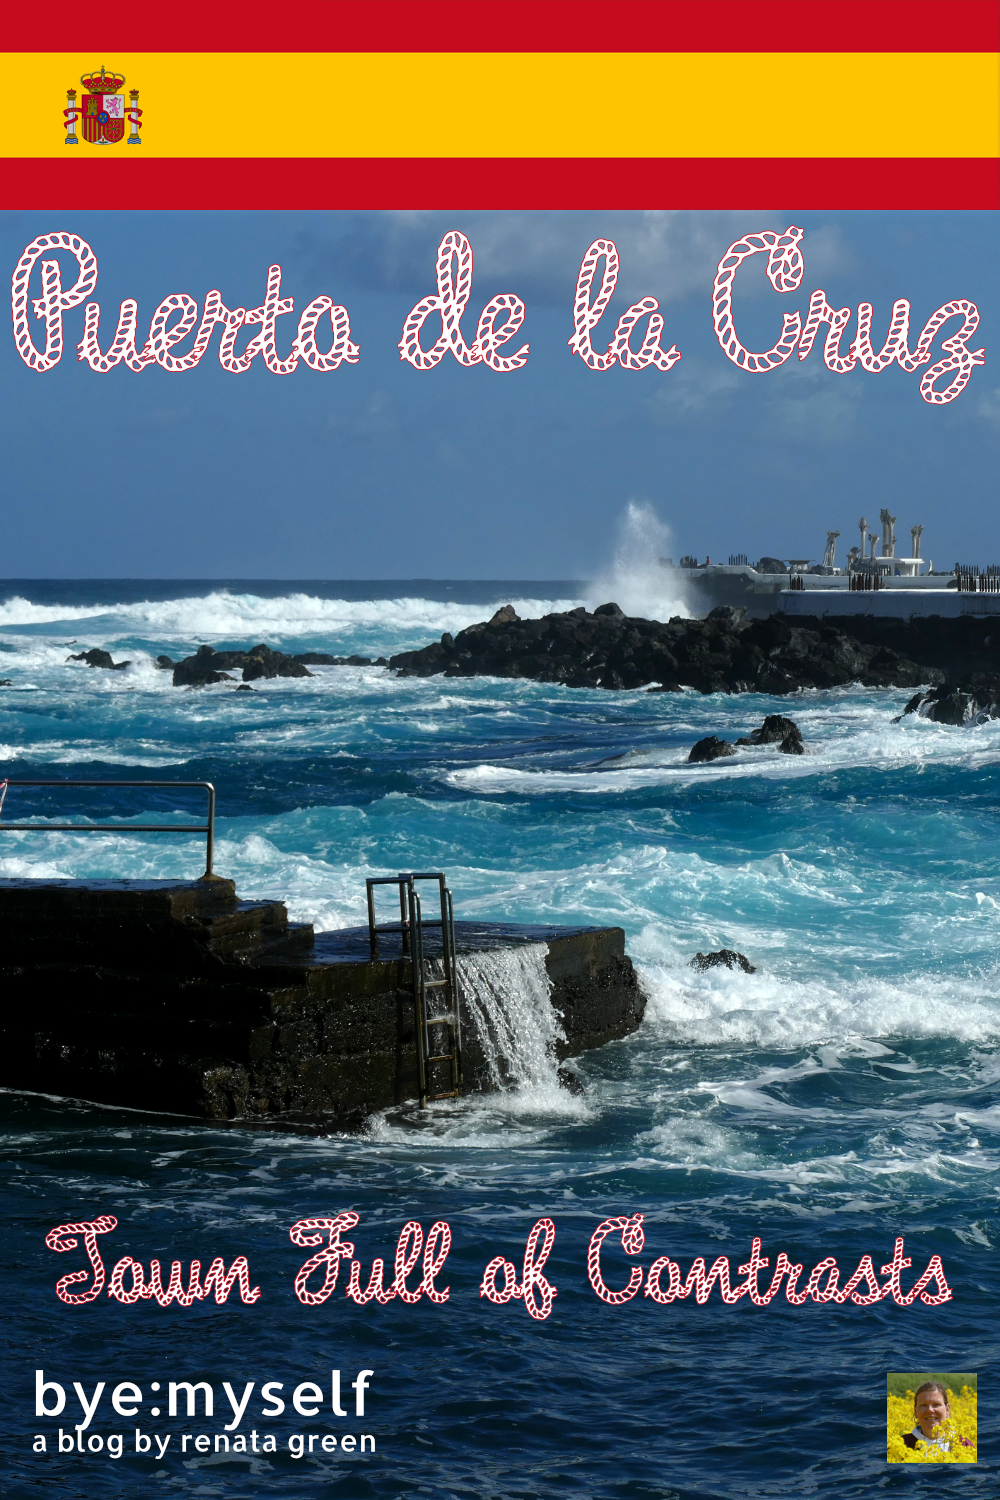 The former fishing village Puerto de la Cruz is a place of many contrasts which makes it the perfect base on Tenerife's northern coast. #puertodelacruz #tenerife #canaryislands #island #beaches #lavabeaches #urbanart #spain #tourism #travel #byemyself